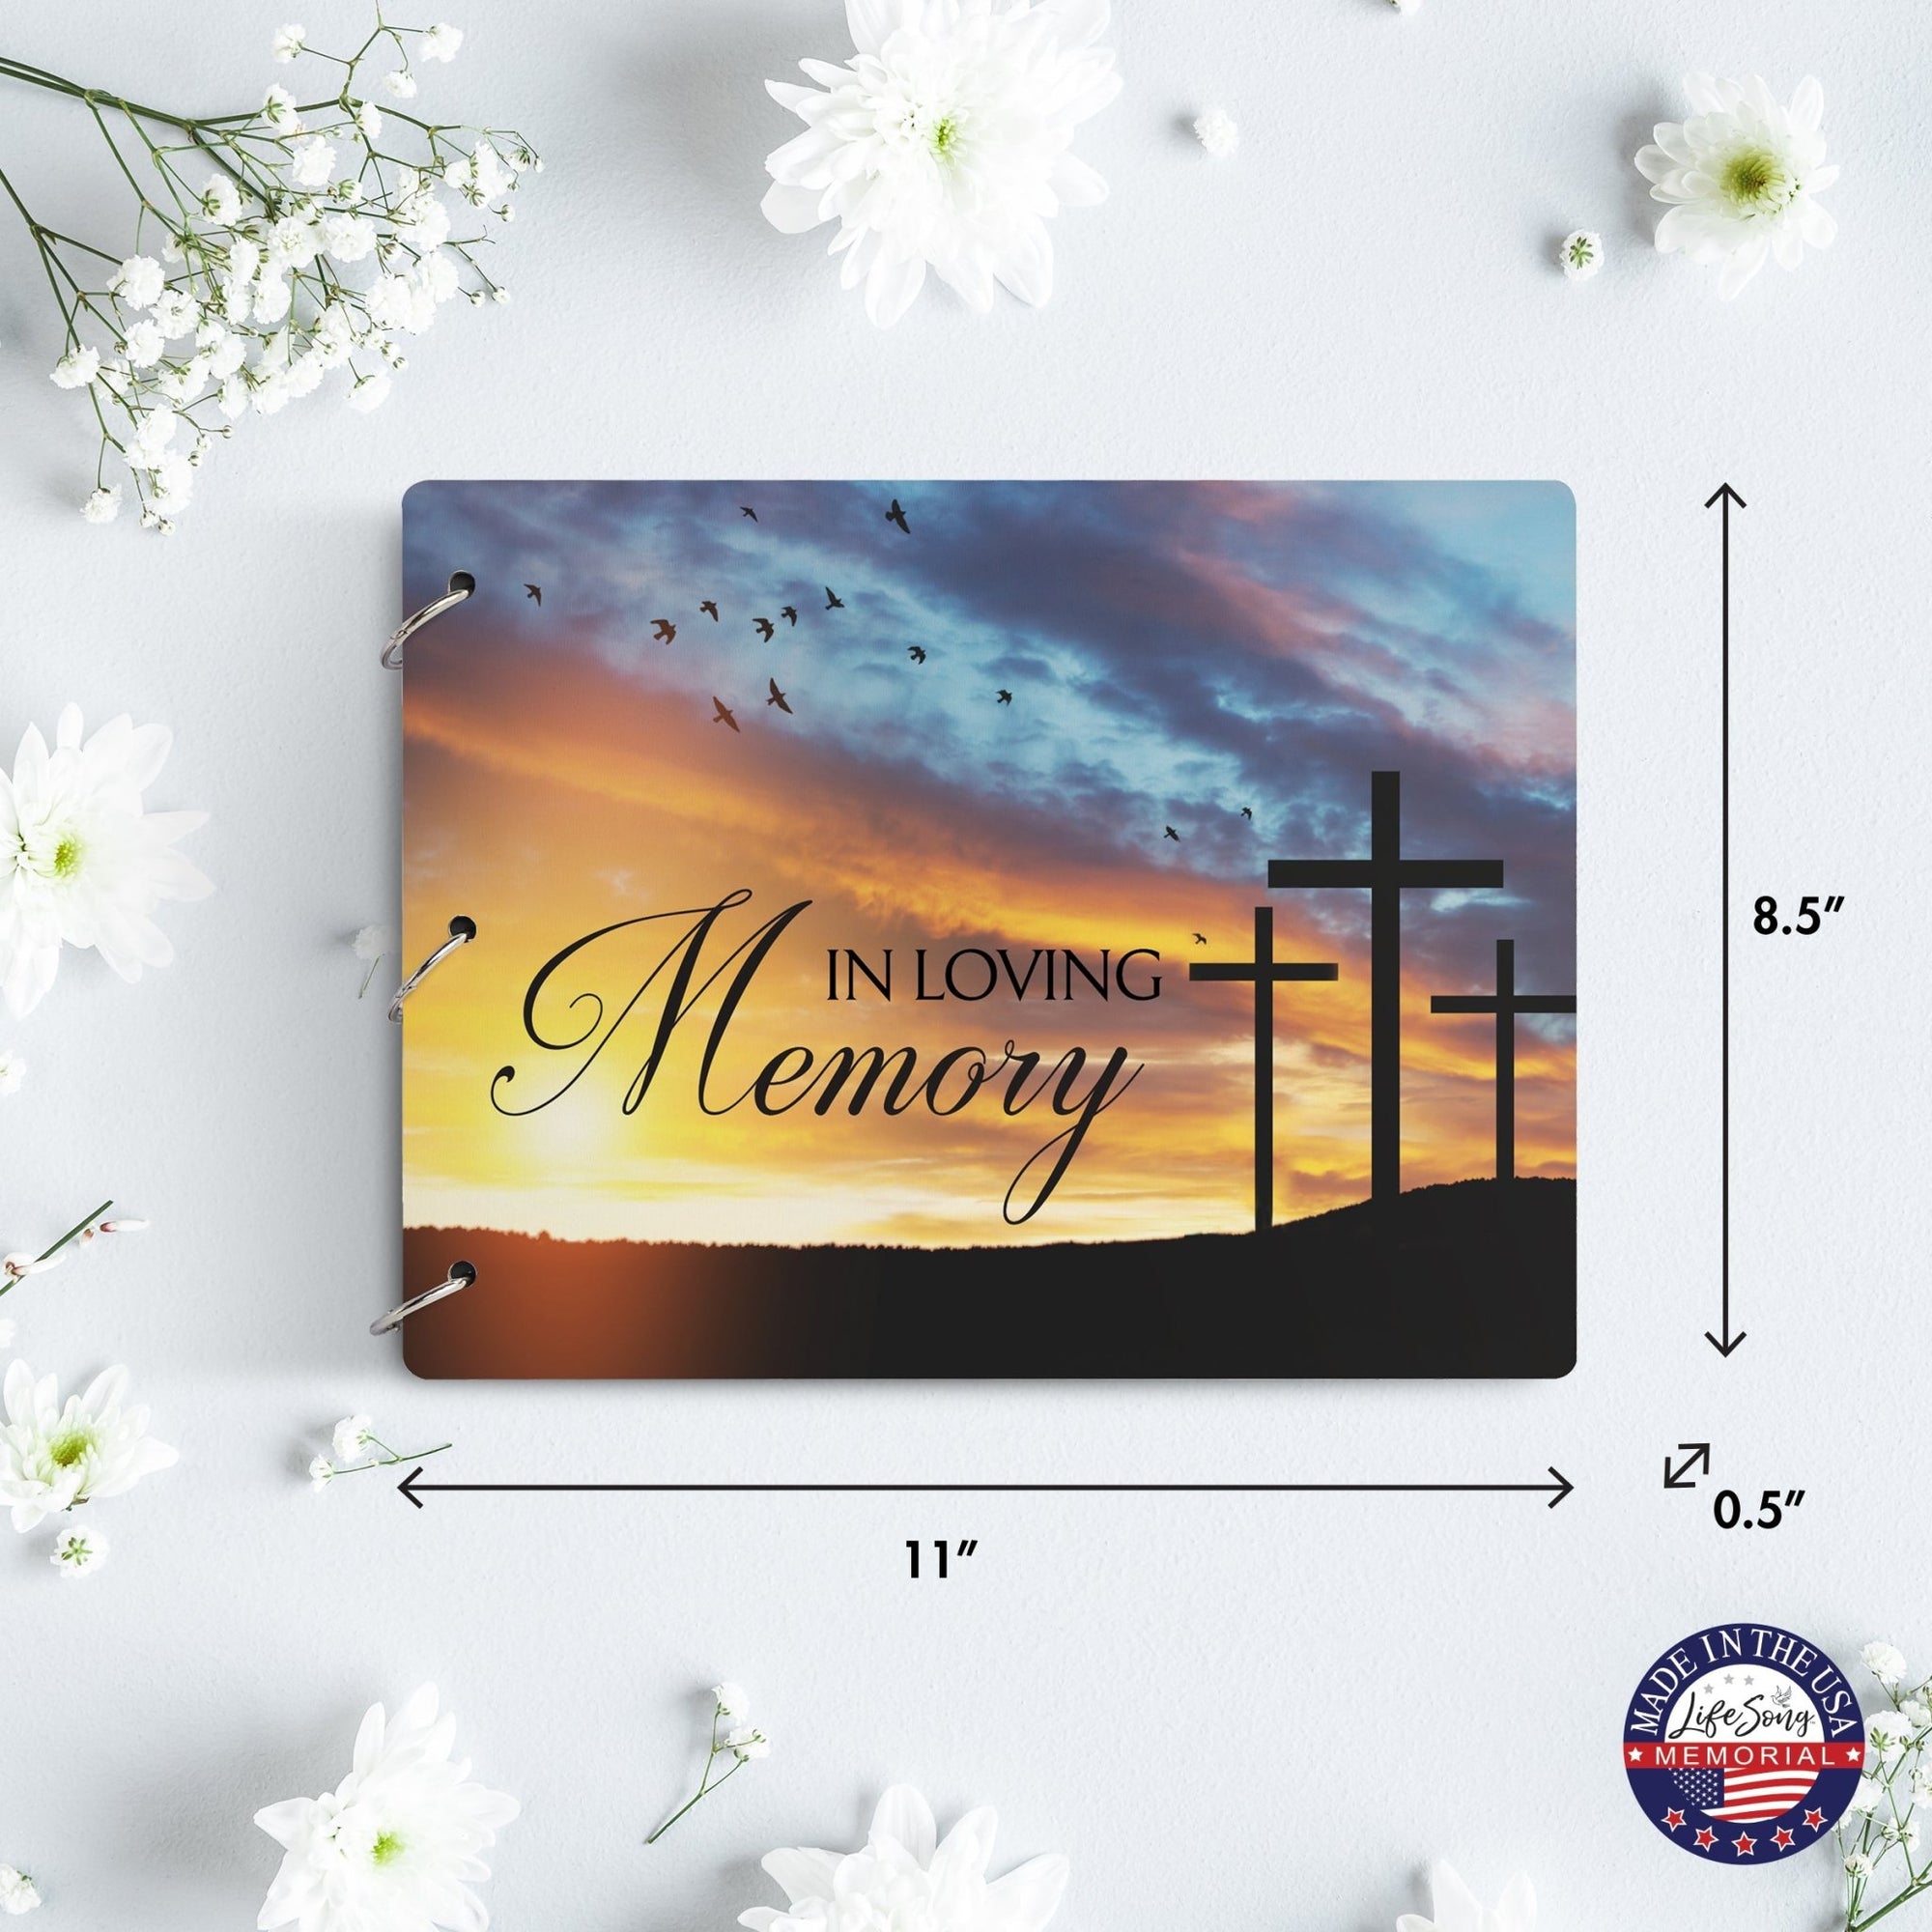 Celebration Of Life Funeral Guest Books For Memorial Services Registry With Wooden Cover - In Loving Memory - LifeSong Milestones